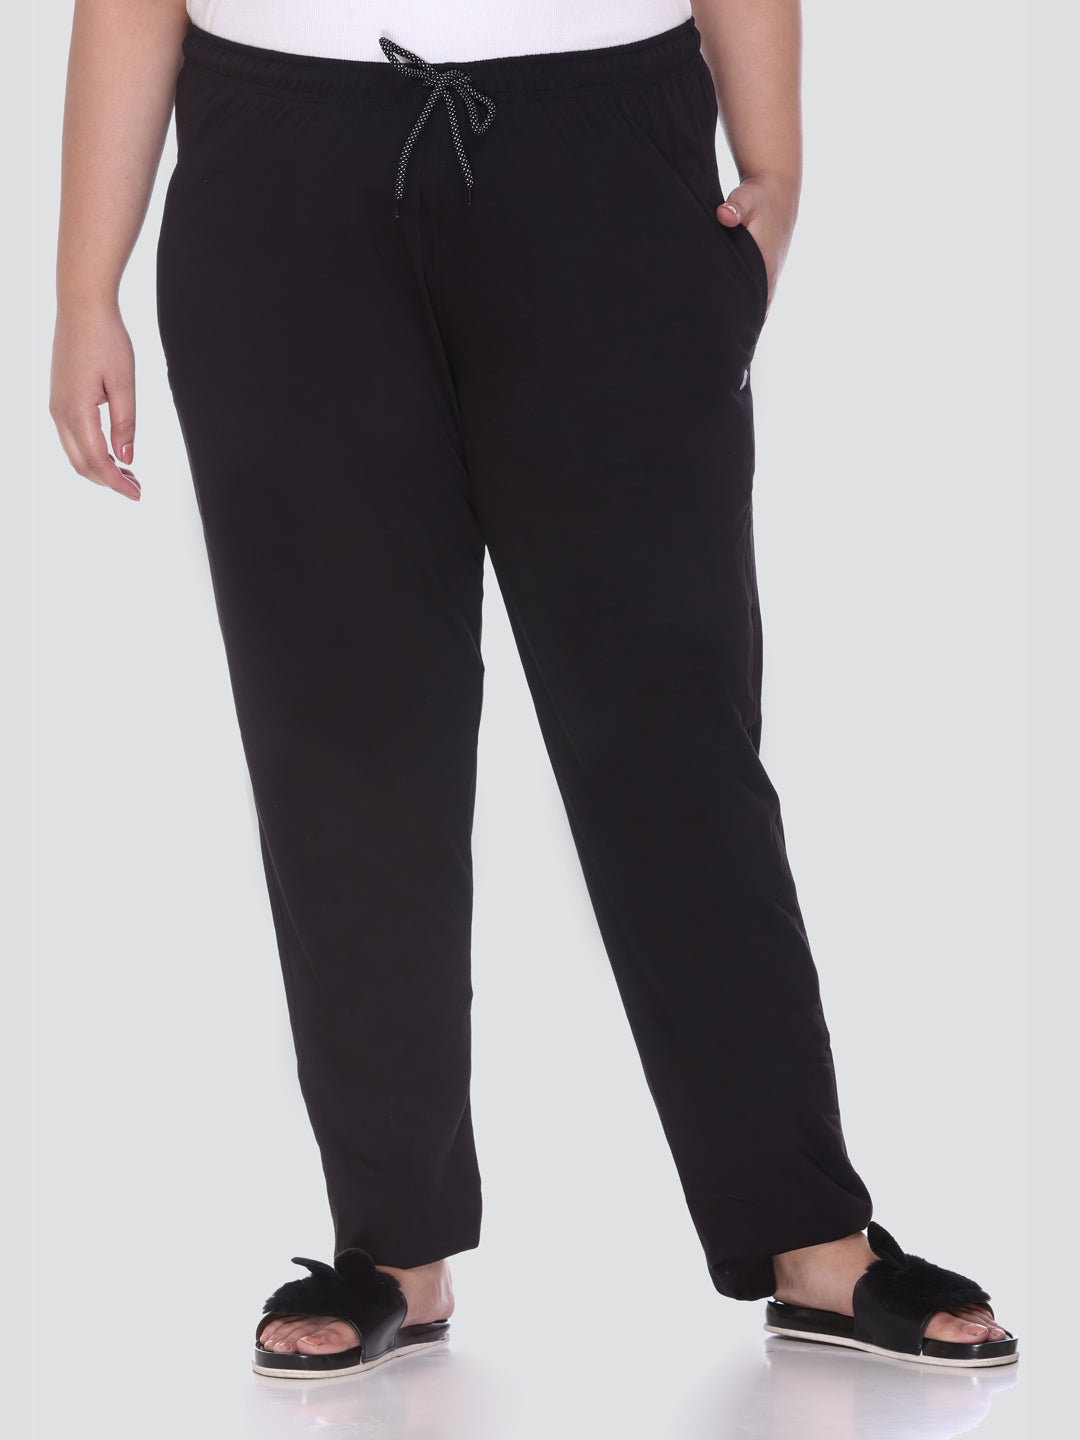 Stylish Black Cotton Track Pants For Women Online In India